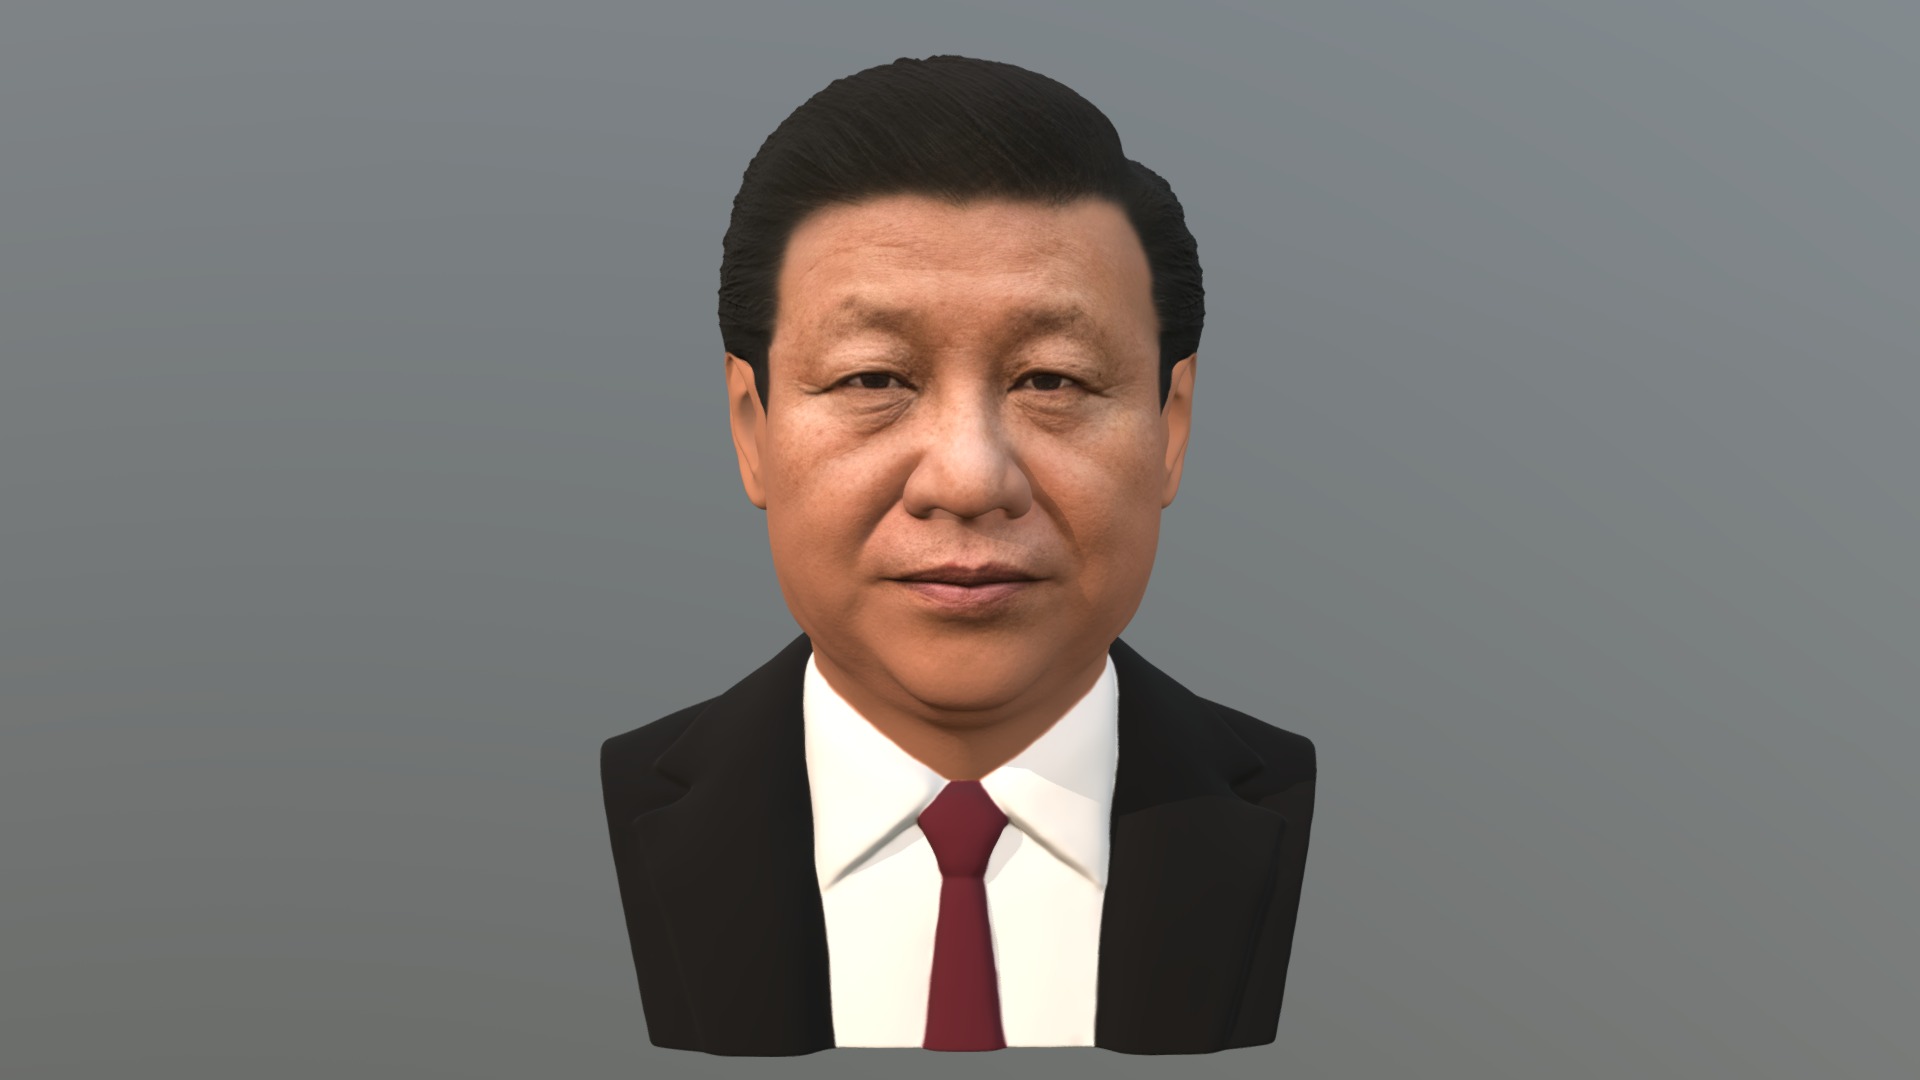 Here is Xi Jinping, President of China bust 3D model ready for full color 3D printing. The model current size is 5 cm height, but you are free to scale it. Zip file contains obj with texture in png. The model was created in ZBrush, Mudbox and Photoshop.

If you have any questions please don’t hesitate to contact me. I will respond you ASAP. I encourage you to check my other celebrity 3D models 3d model